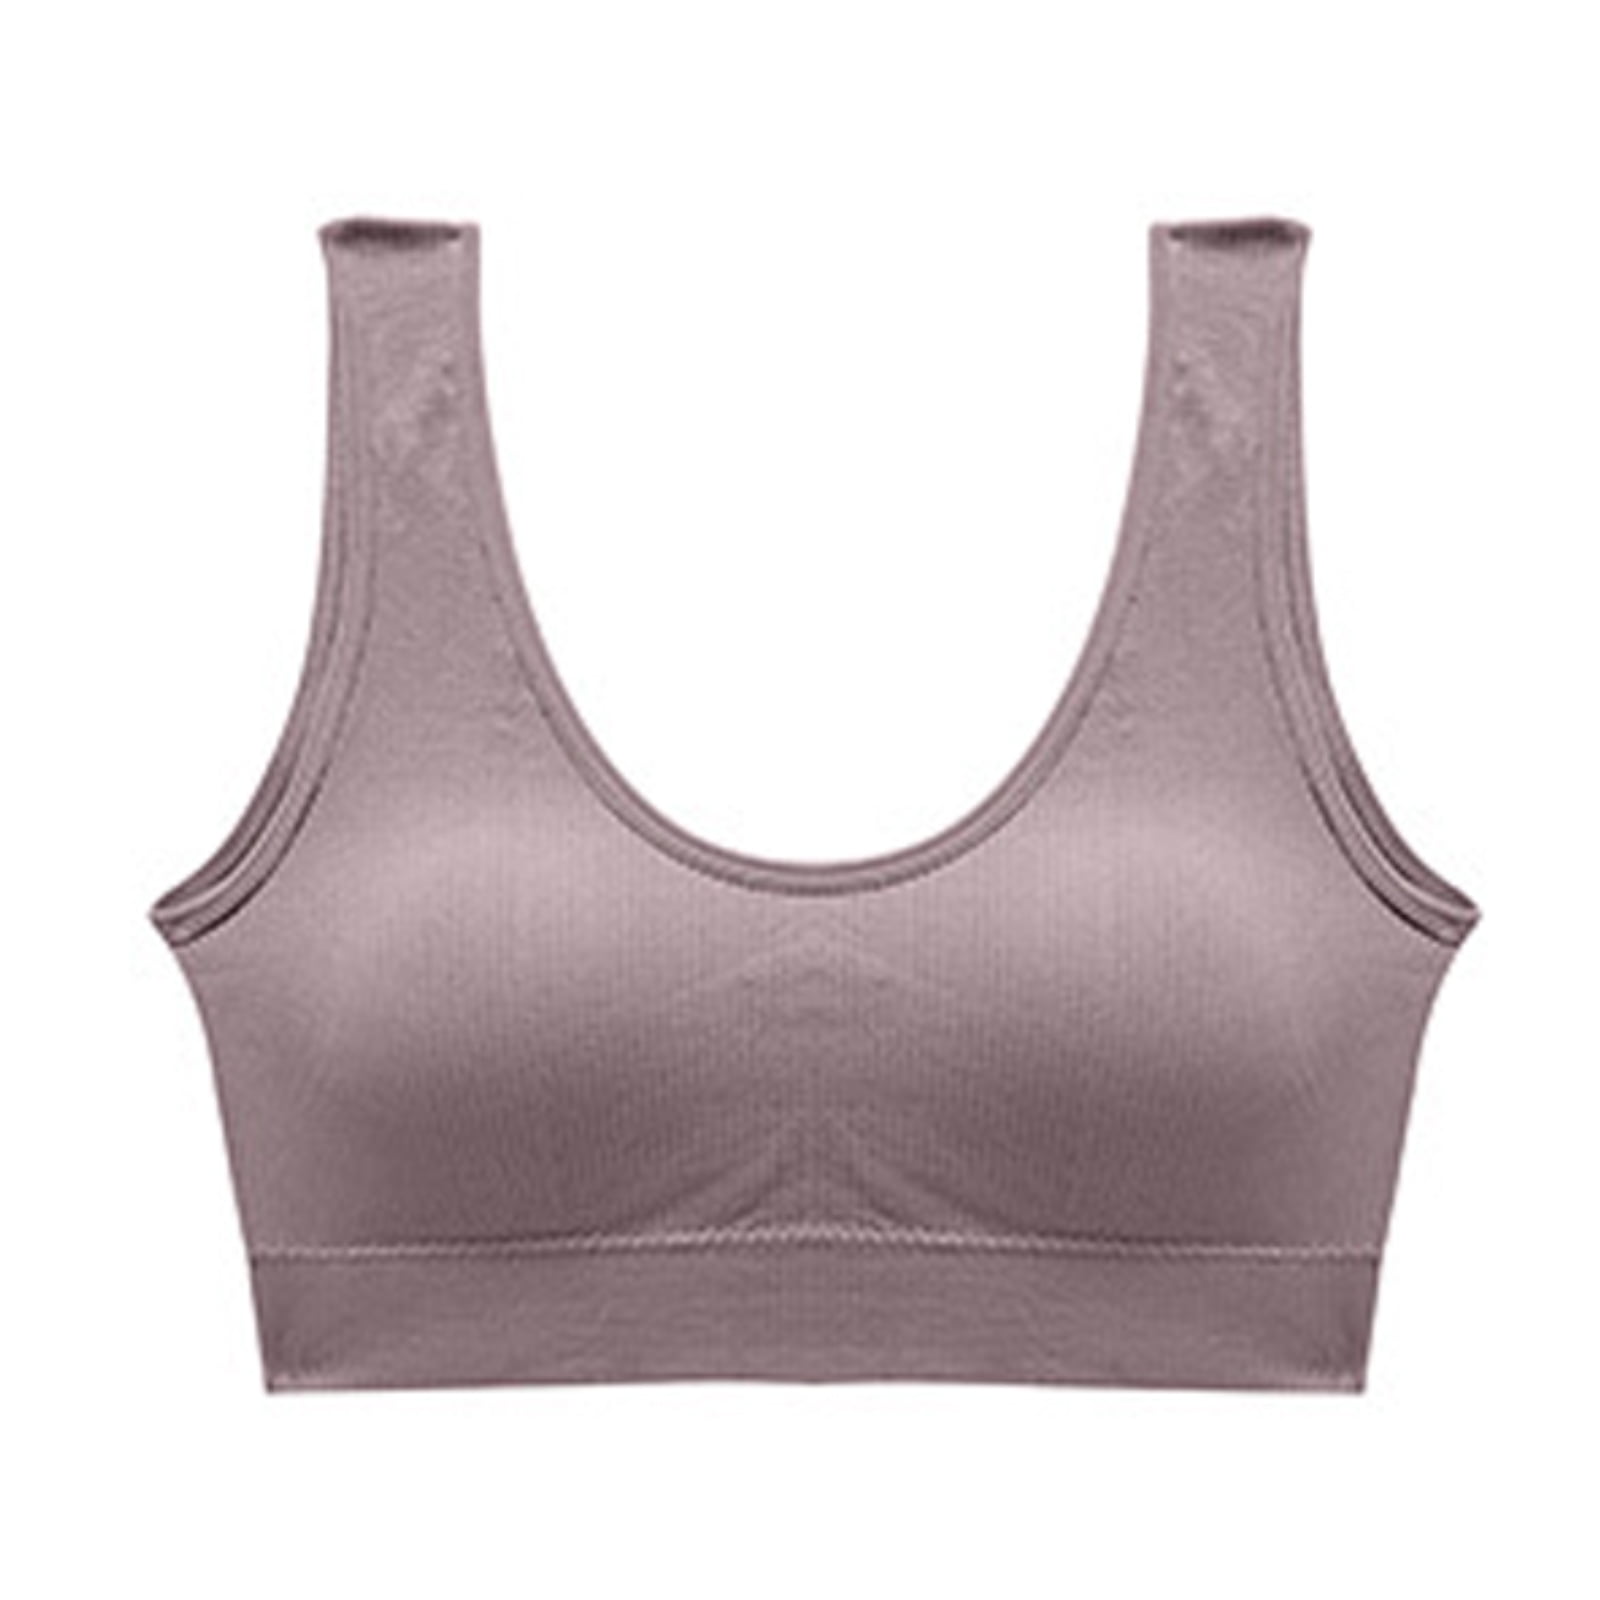  Sports Bras for Women,Bras for Large Breasted Women Full- Coverage Wirefree Padded Bra Lightly Lined Beauty Back Everyday Underwear  for Women,Racerback Bras for Women Beige 95G : Sports & Outdoors